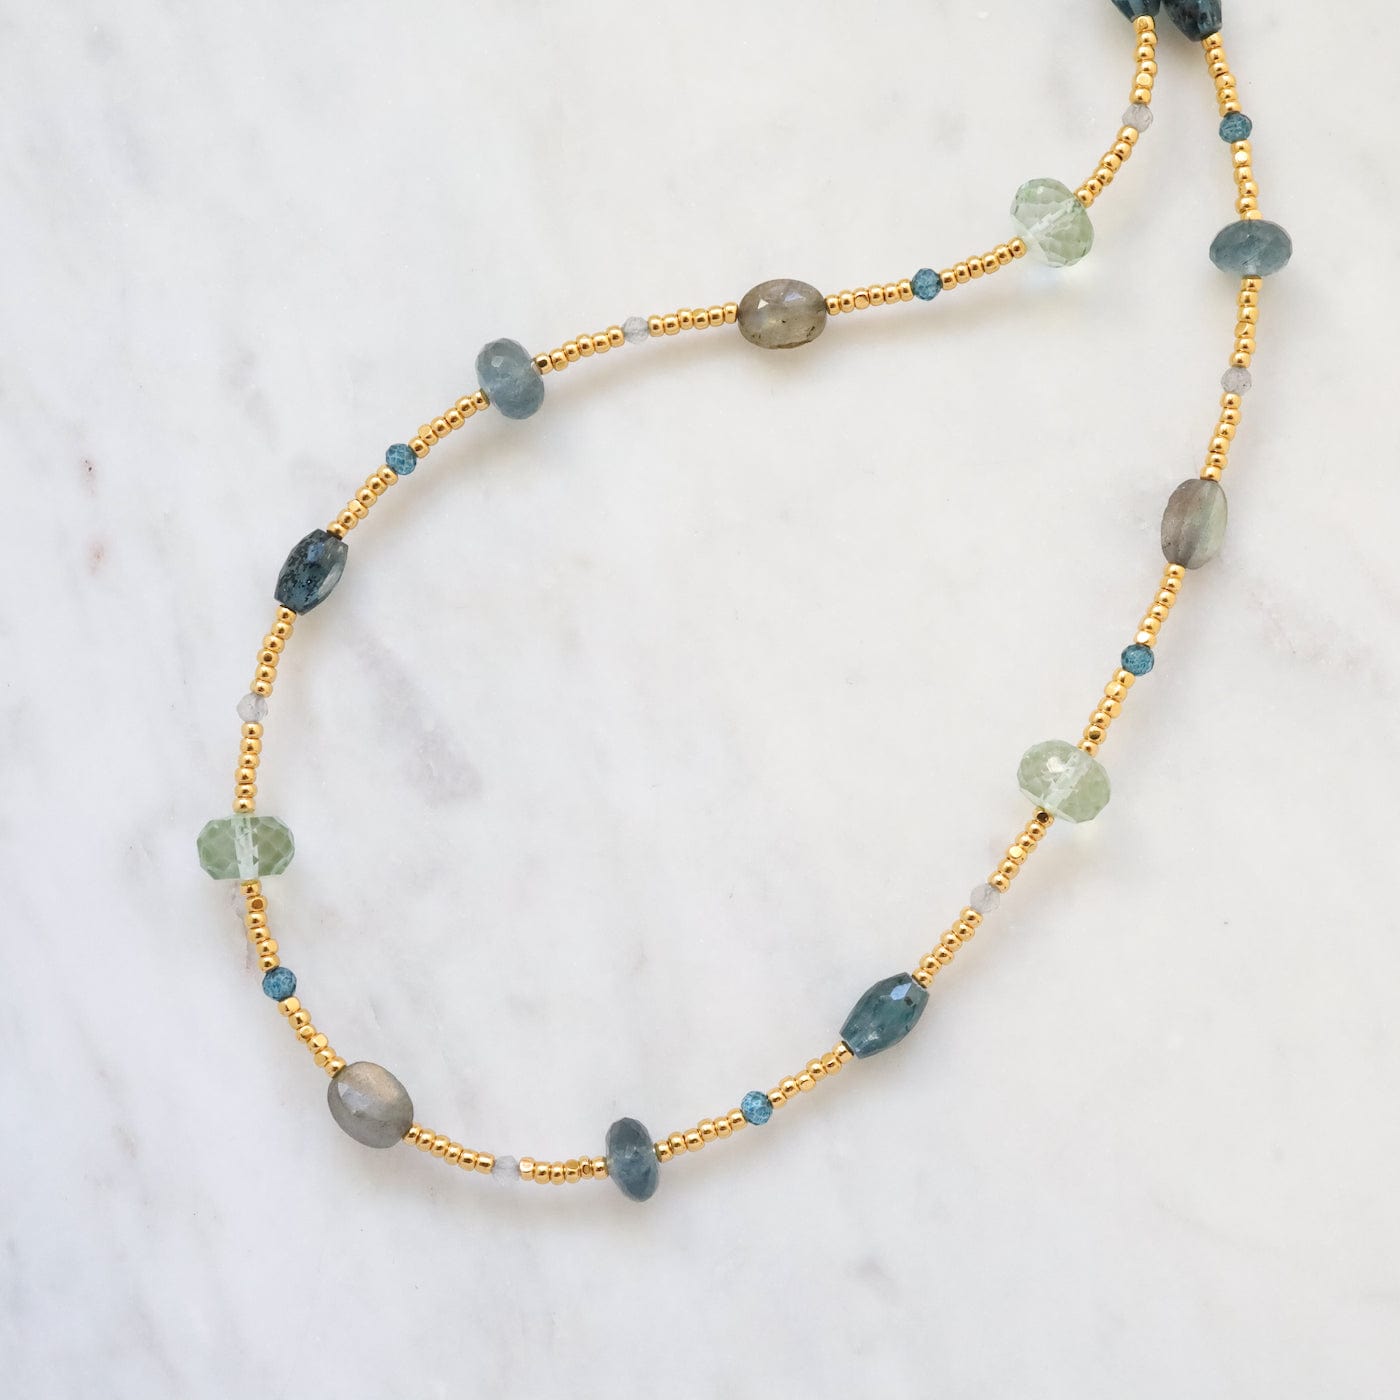 NKL-GF Golden glass Dotted with Labradorite Necklace